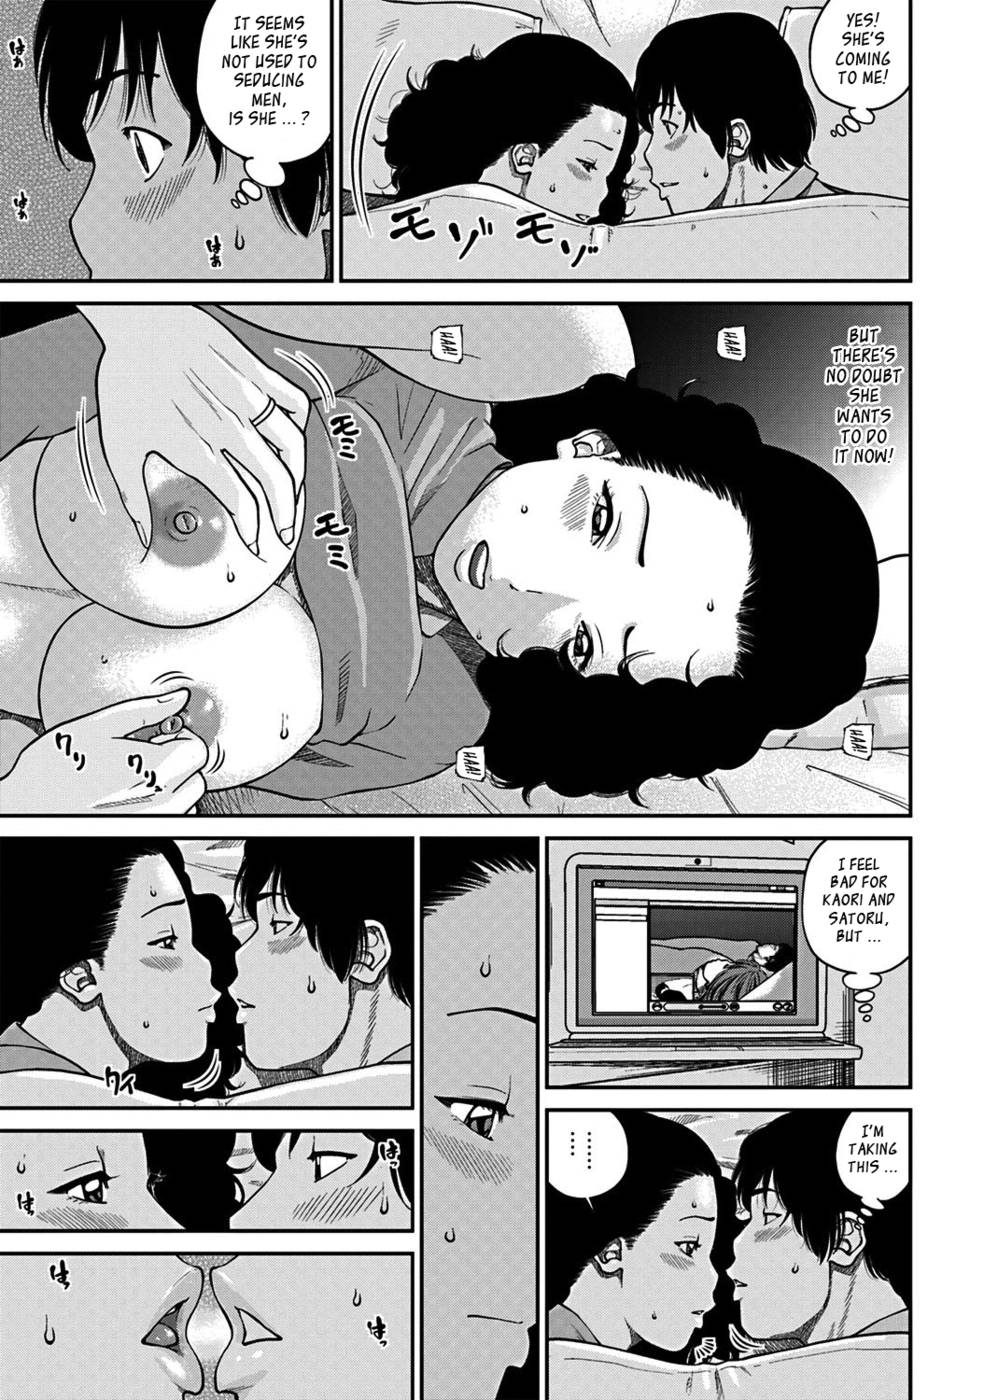 Hentai Manga Comic-33 Year Old Unsatisfied Wife-Chapter 2-Spouse Swapping-First Night-9